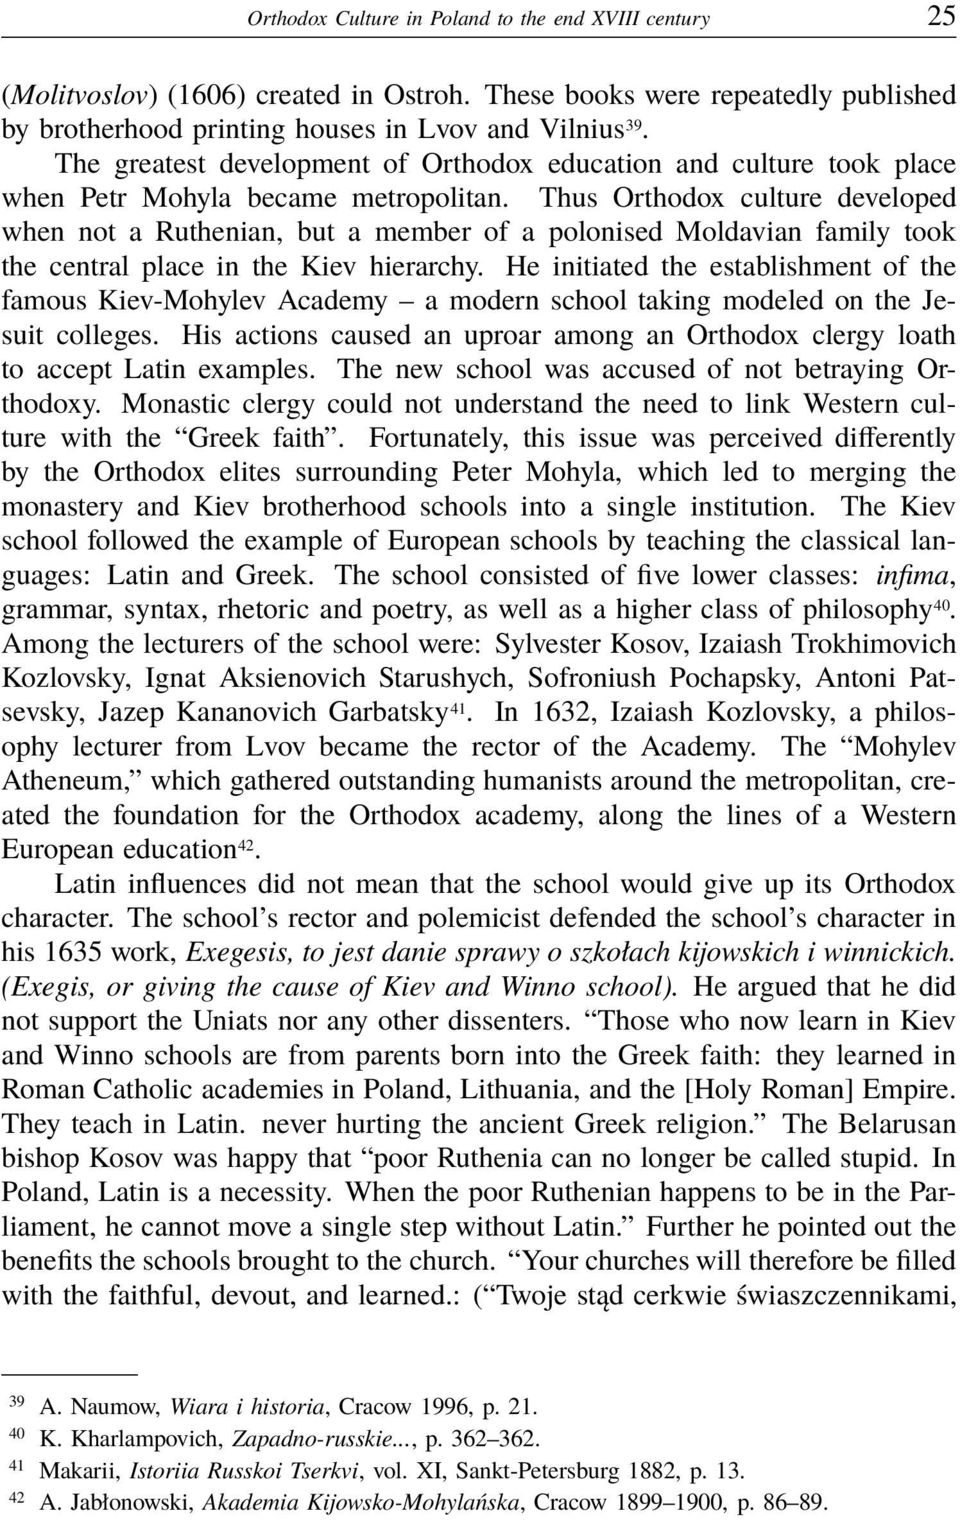 Thus Orthodox culture developed when not a Ruthenian, but a member of a polonised Moldavian family took the central place in the Kiev hierarchy.